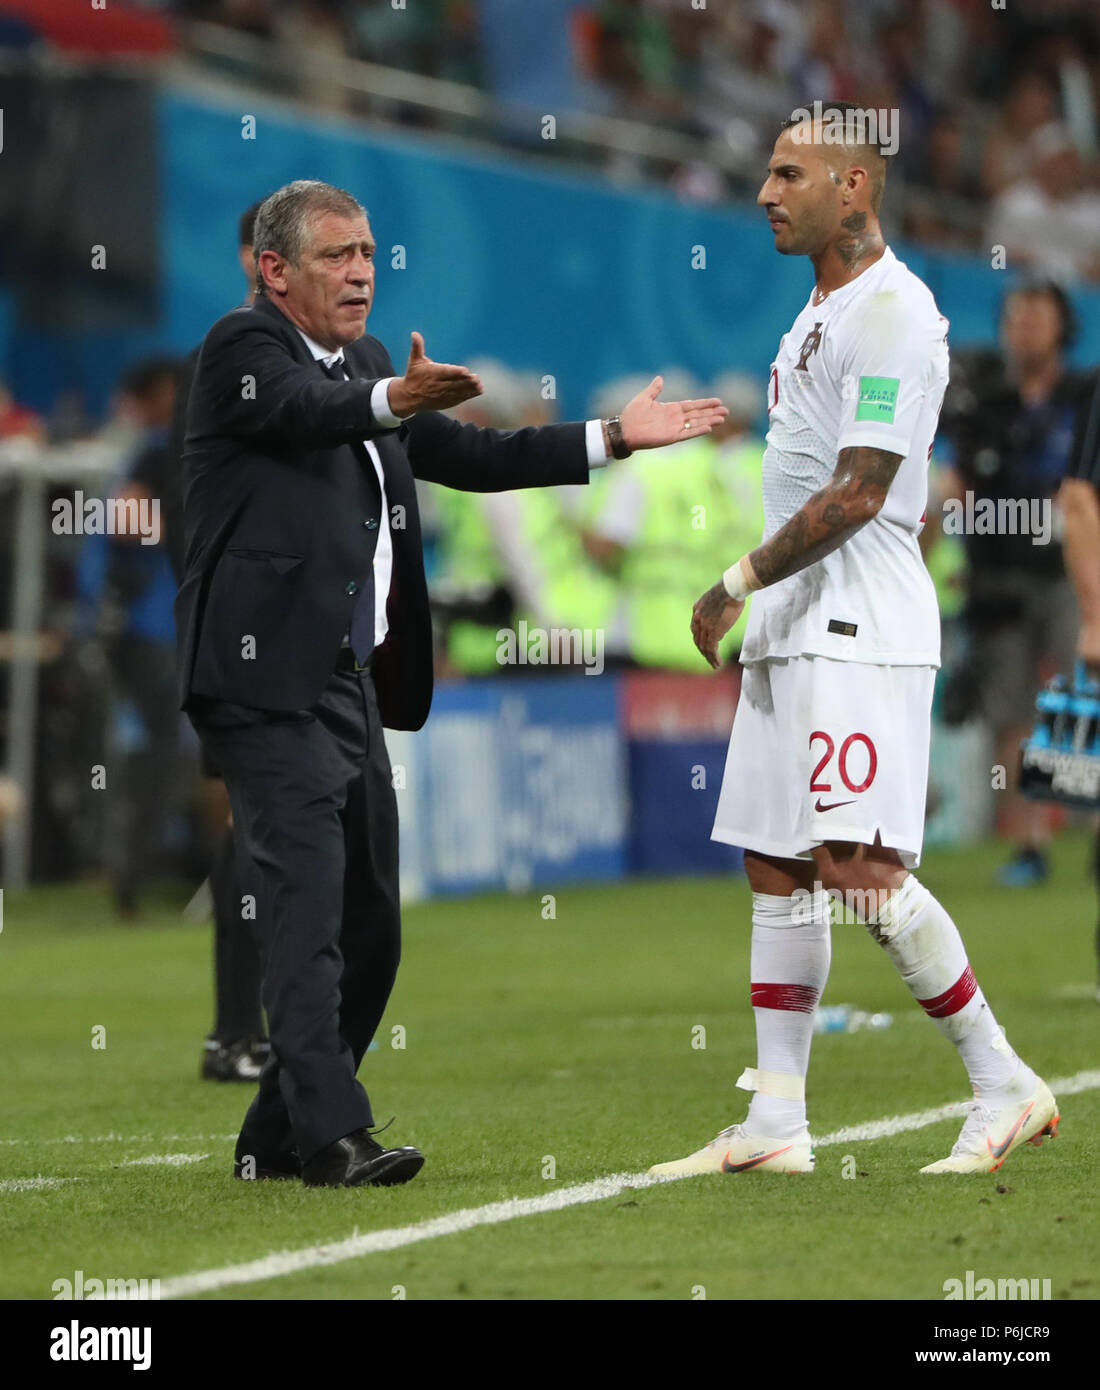 Sochi, Russia. 30th June, 2018. Head coach Fernando Santos (L) of Portugal reacts during the 2018 FIFA World Cup round of 16 match between Uruguay and Portugal in Sochi, Russia, June 30, 2018. Uruguay won 2-1 and advanced to the quarter-final. Credit: Ye Pingfan/Xinhua/Alamy Live News Stock Photo